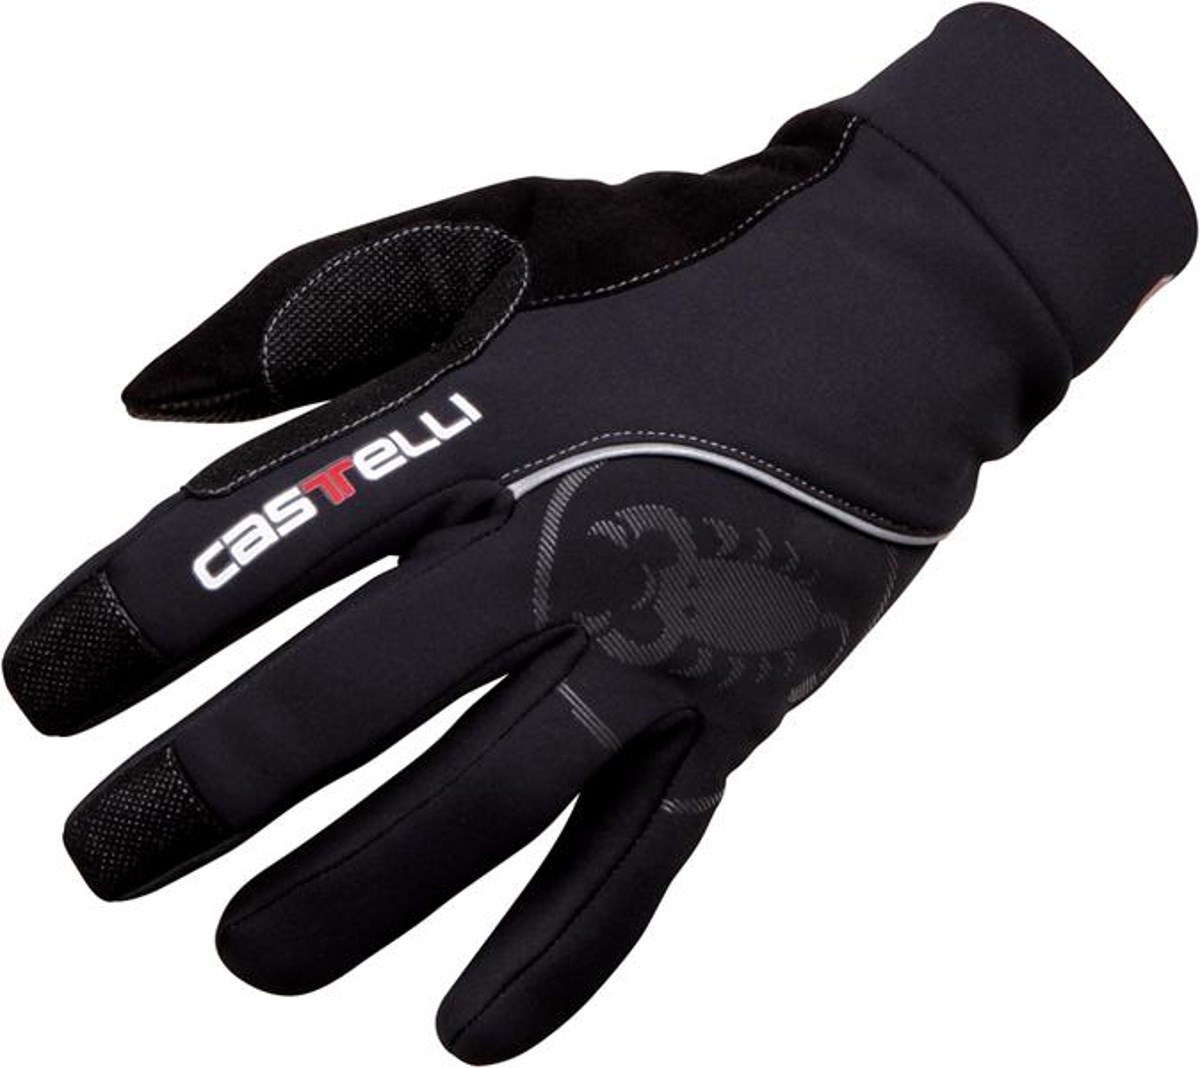 Castelli Chiro Due Long Finger Cycling Gloves product image